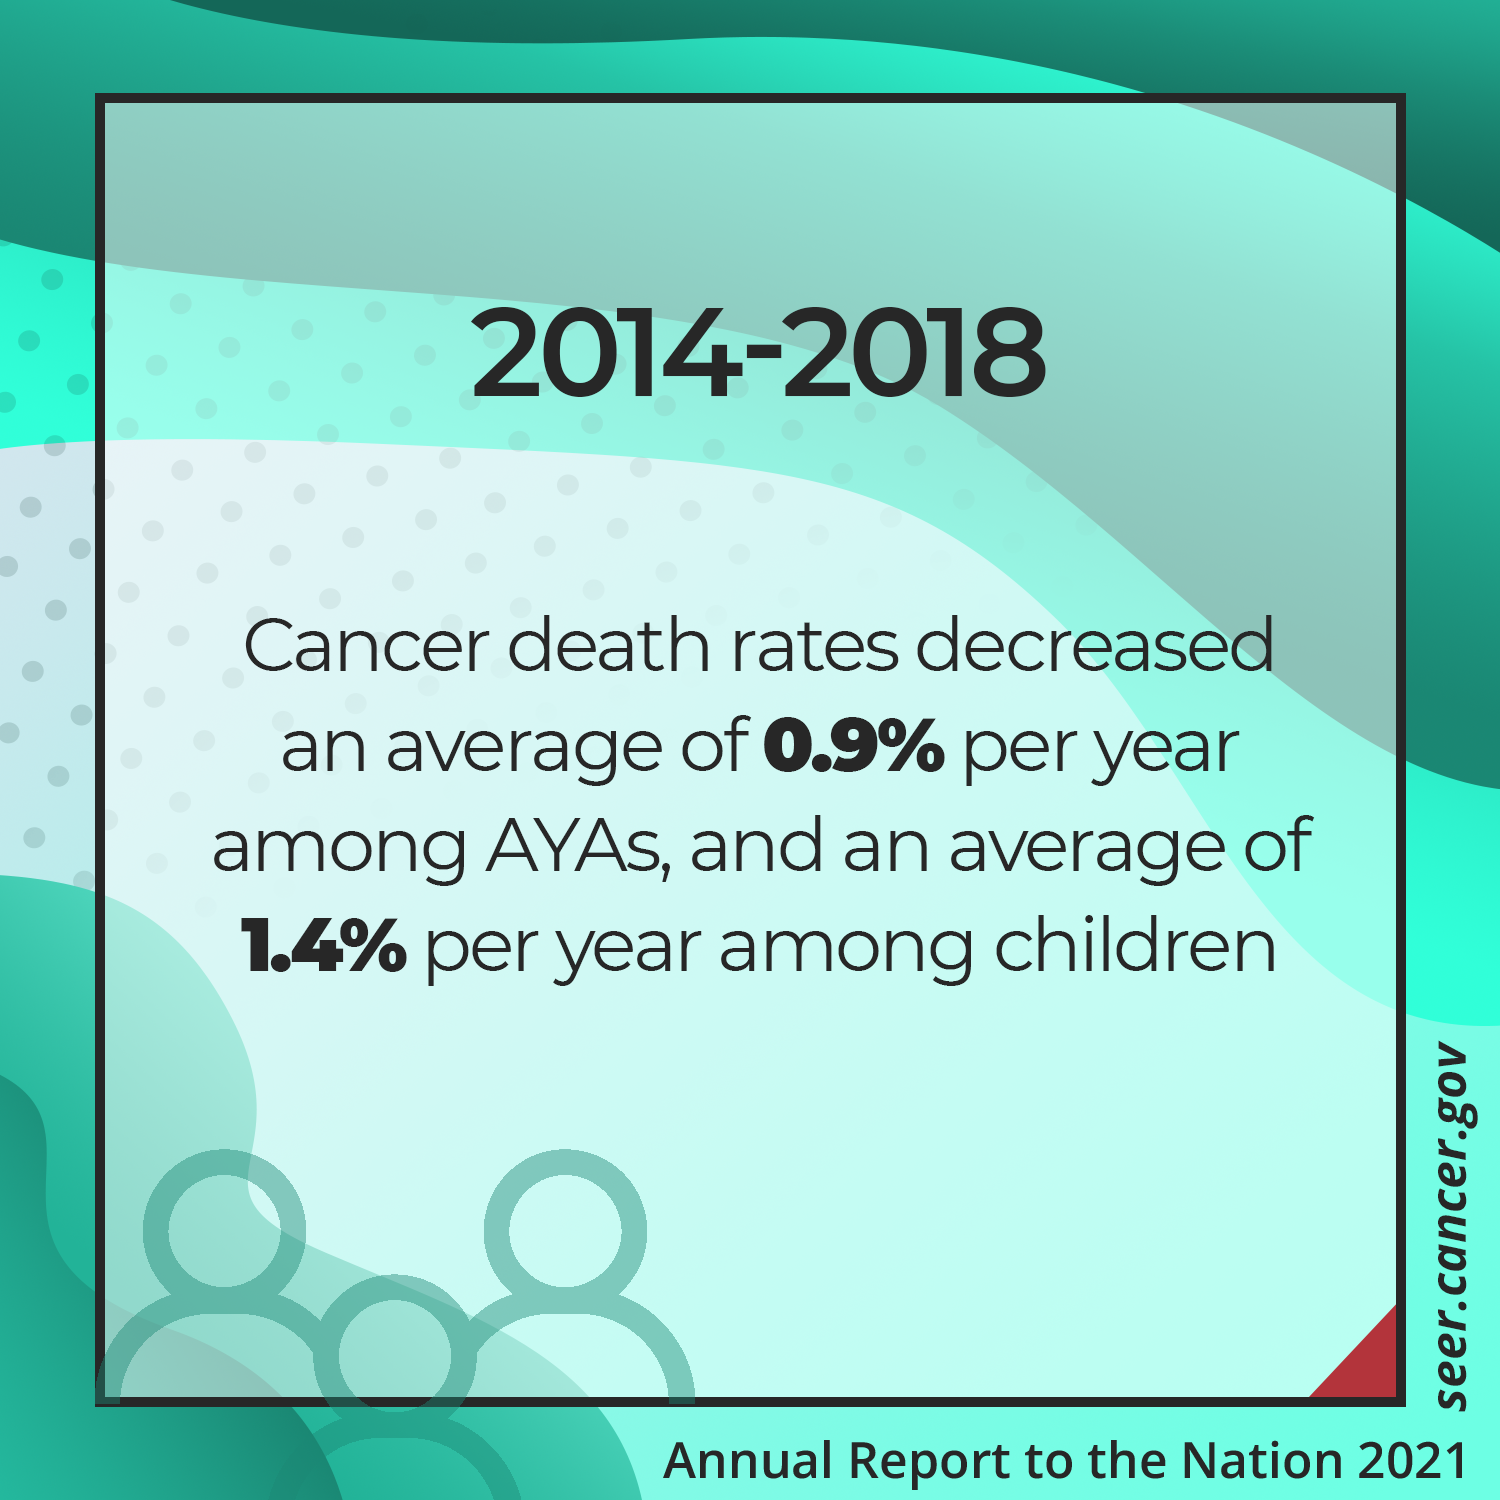 Cancer death rates decreased an average of 0.9% per year among AYAs, and an average of 1.4% per year among children between 2014 and 2018.